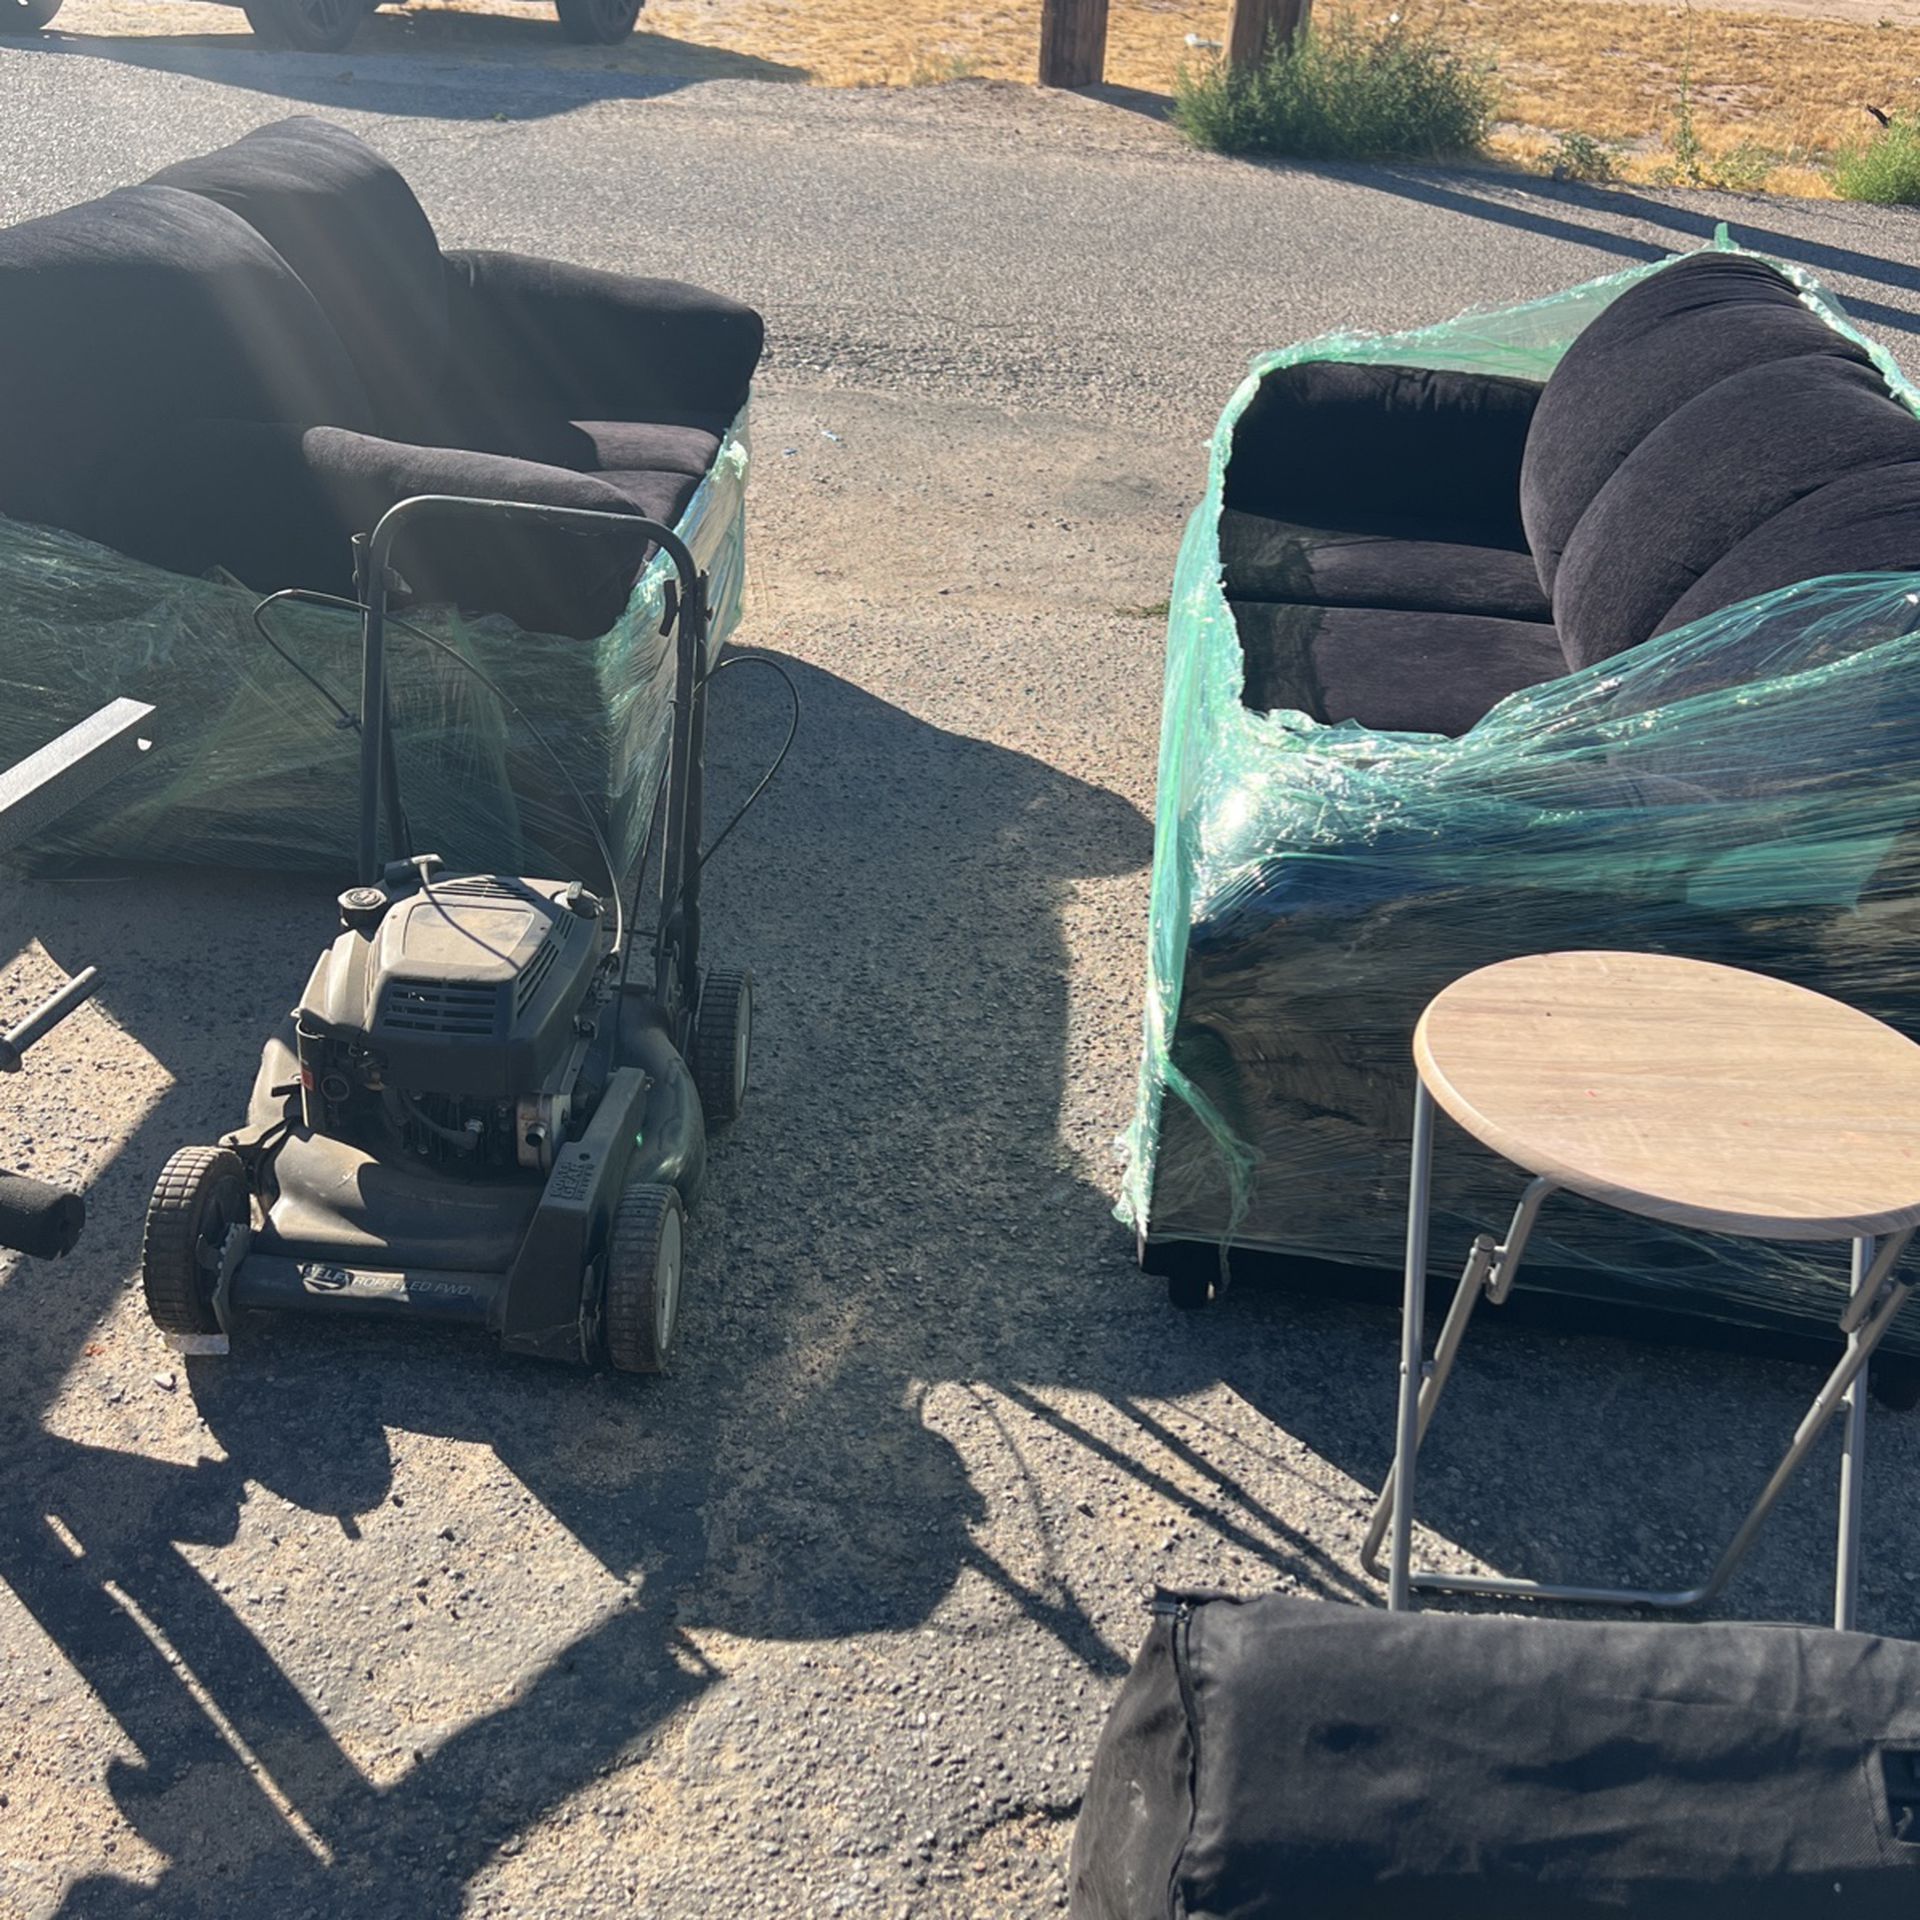 New 5 Piece Mega Fort $30 for Sale in Victorville, CA - OfferUp